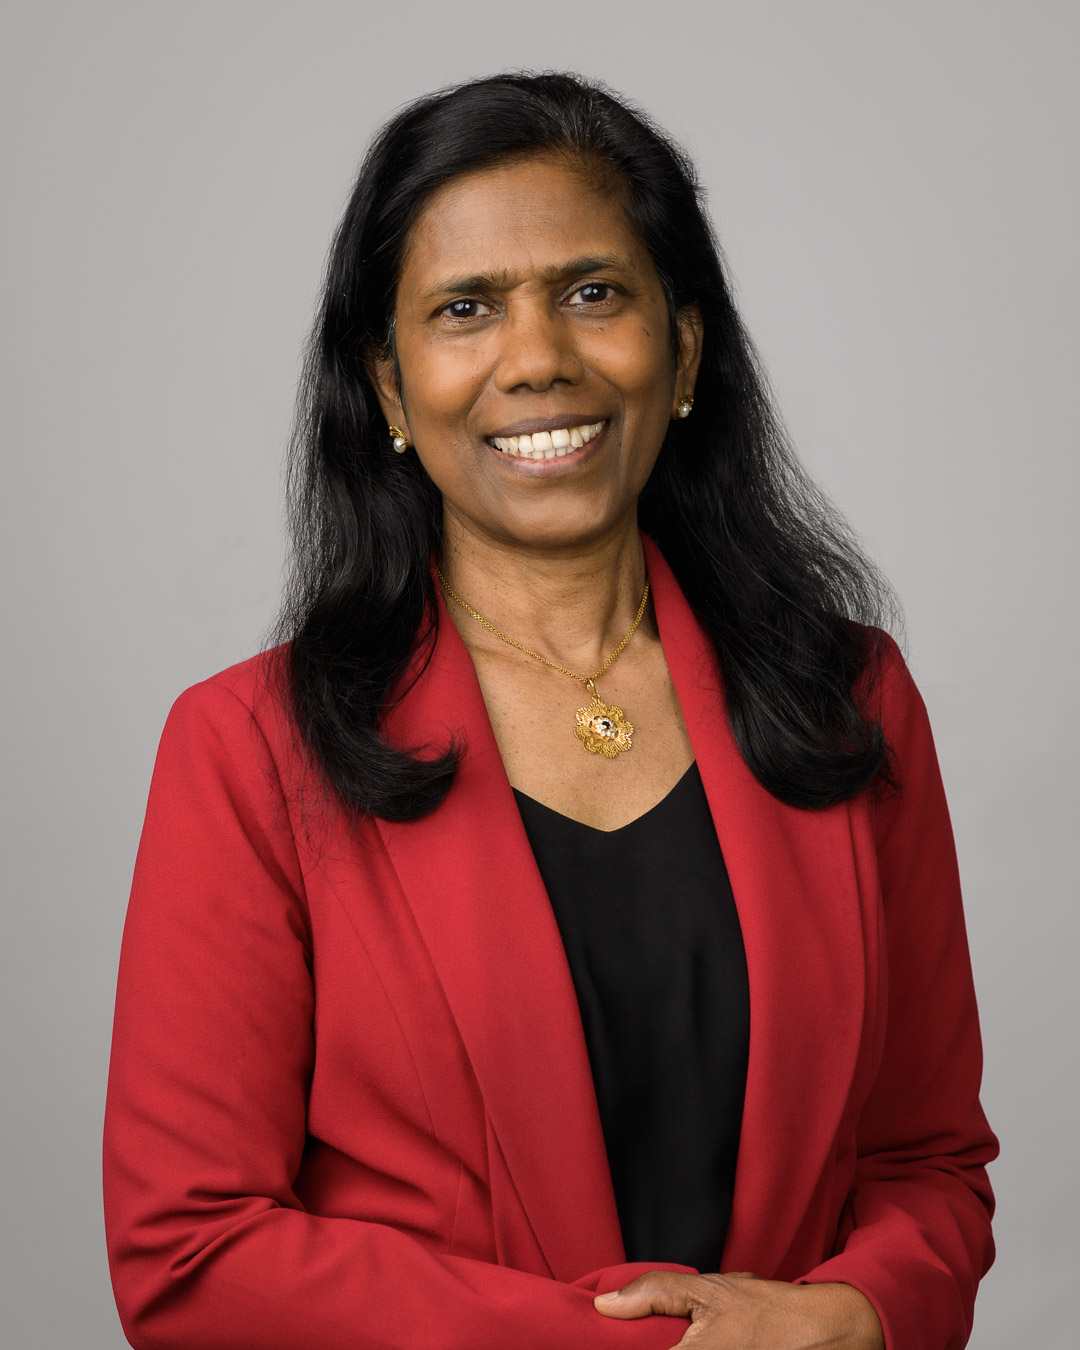 Professor Valsamma Eapen, Academic and child psychiatrist at UNSW Medicine & Health and South West Sydney Local Health District  